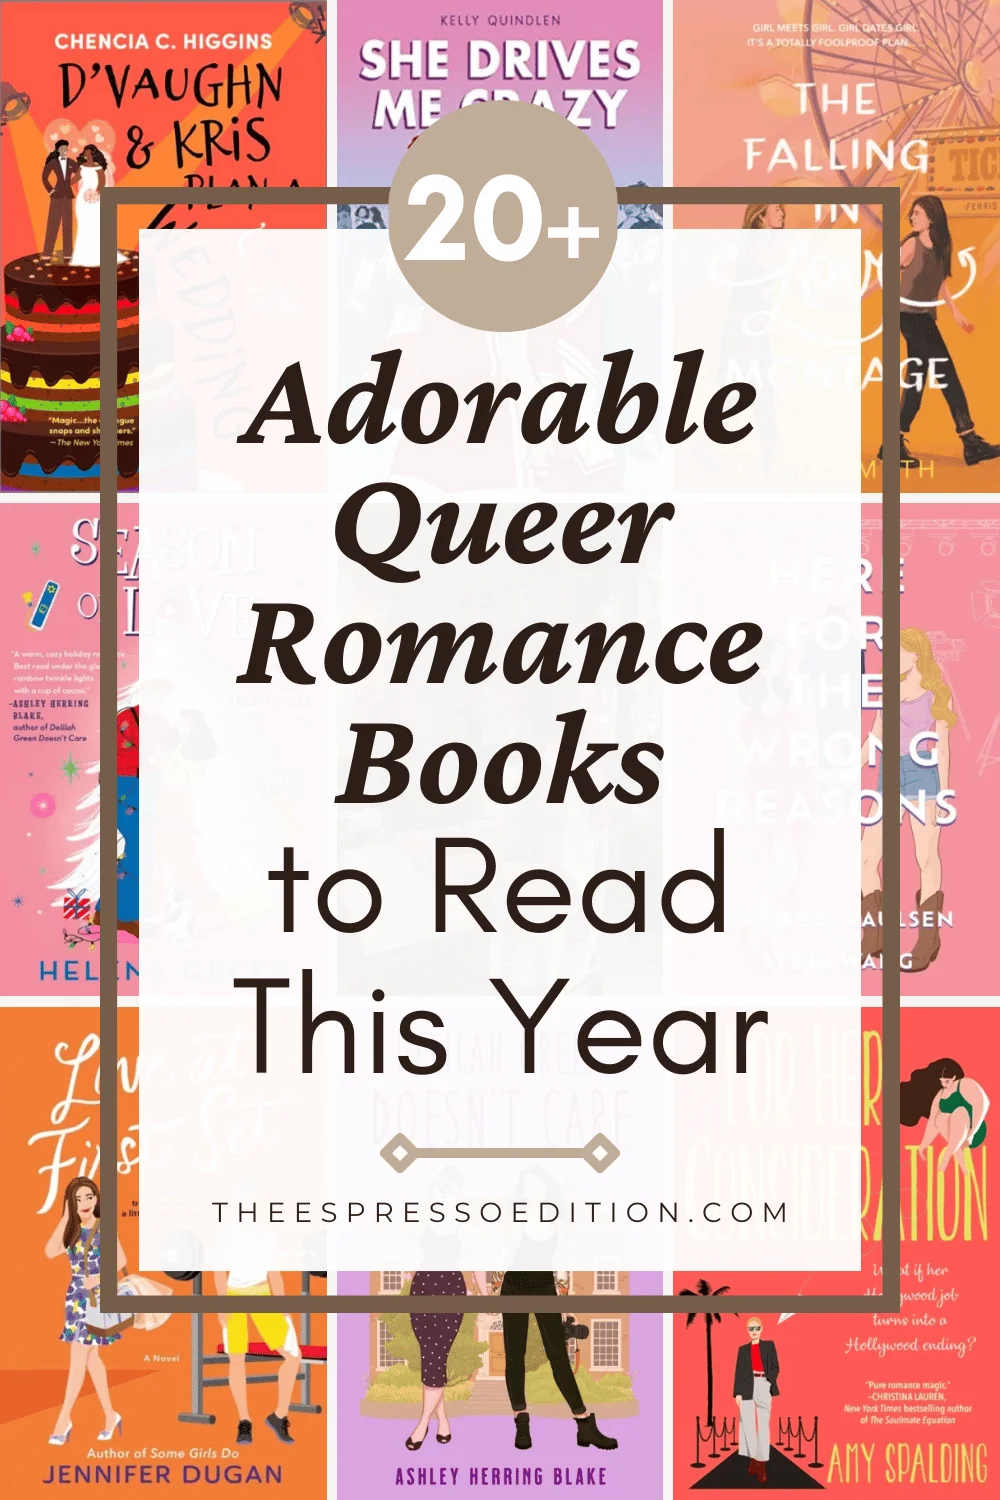 20+ Adorable Queer Romance Books to Read This Year by The Espresso Edition cozy bookish blog